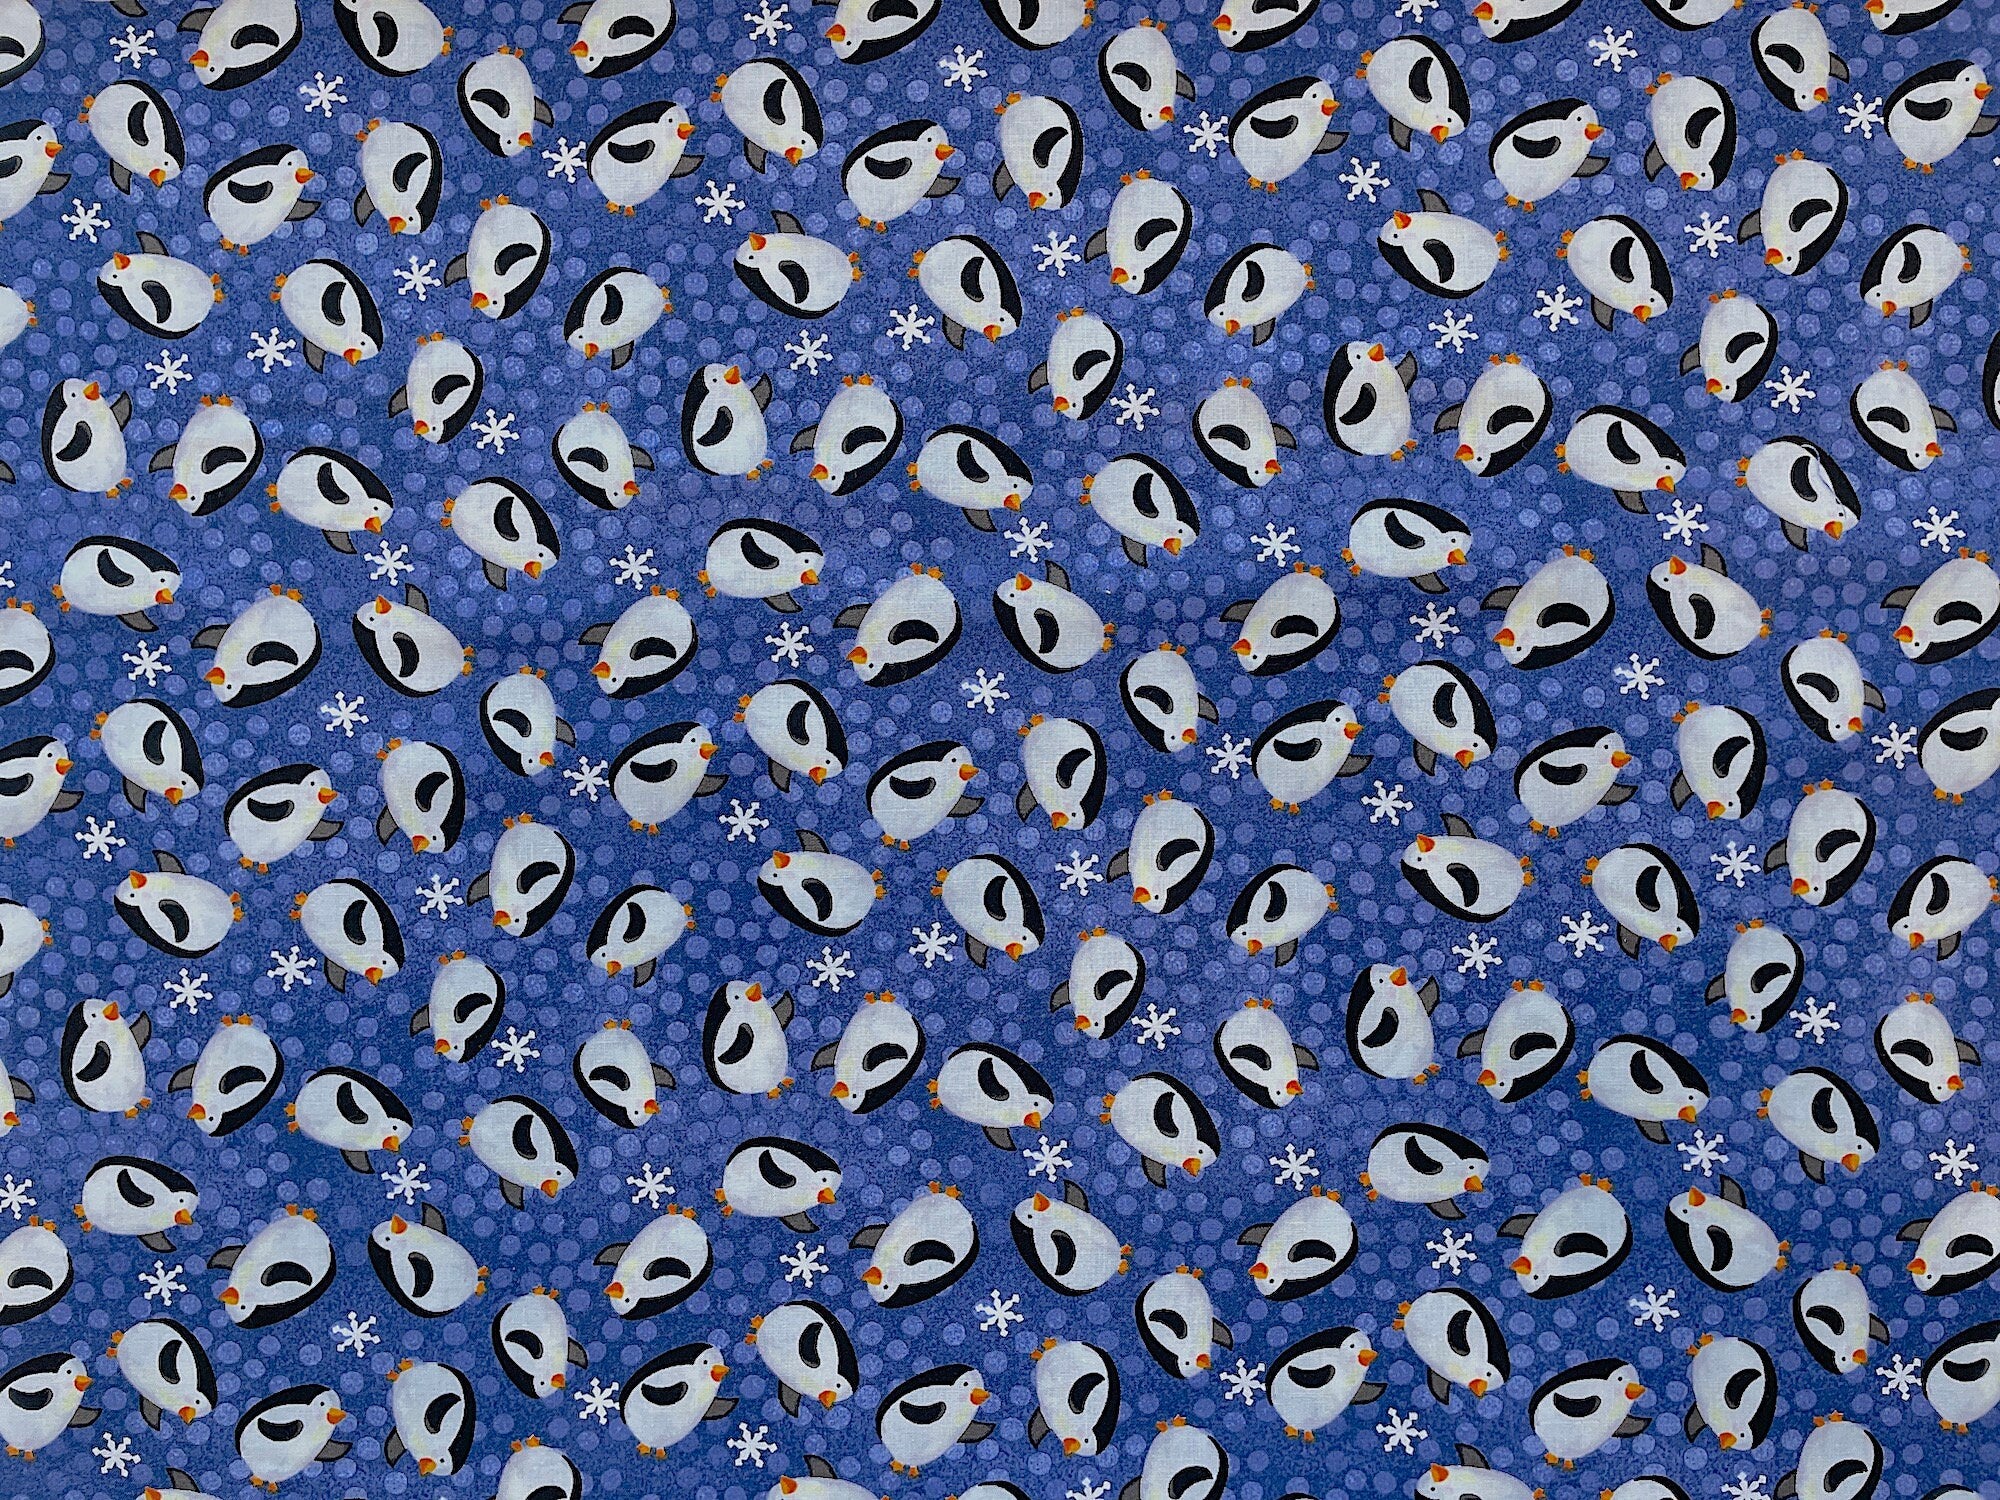 Black and white penguins cover this blue fabric by Clothworks